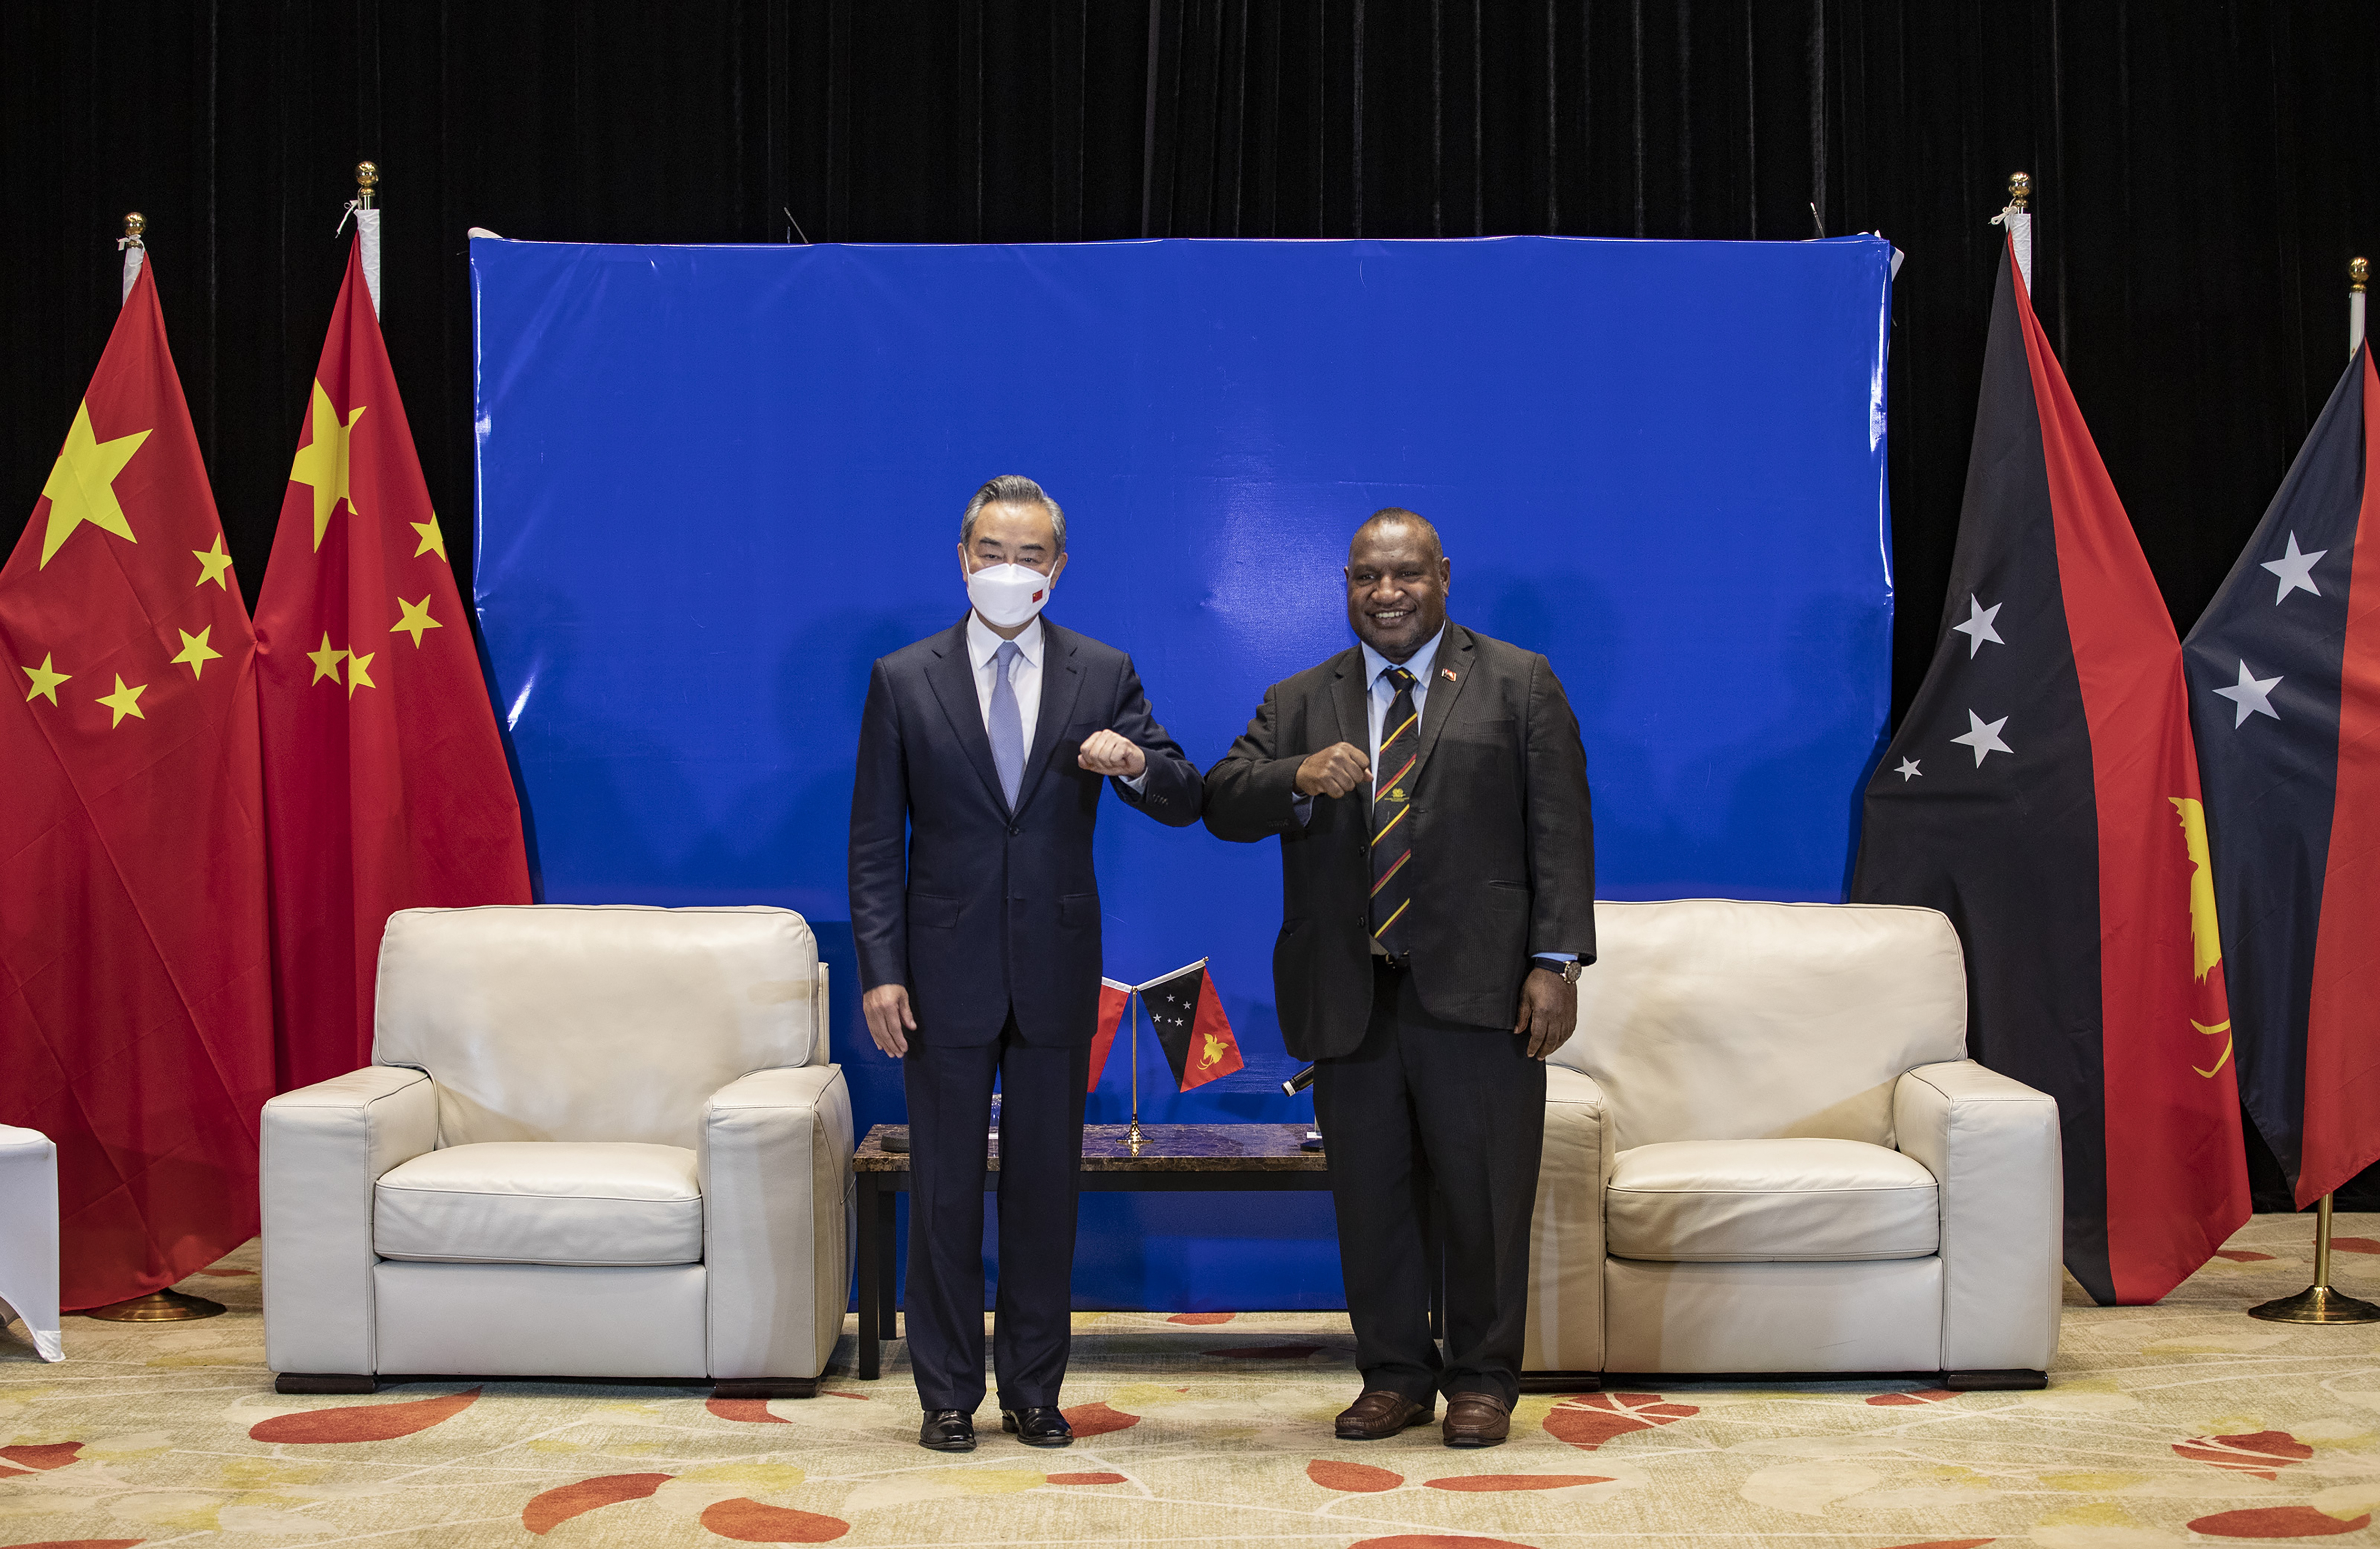 n this photo released by Xinhua News Agency, Papua New Guinea (PNG) Prime Minister James Marape at right bumps elbows with visiting Chinese Foreign Minister Wang Yi in Port Moresby, Papua New Guinea, Friday, June 3, 2022. The foreign ministers of Australia and China were both making their final stops Friday, June 3, 2022 on what has become an island-hopping diplomatic duel in the South Pacific. (Bai Xuefei/Xinhua via AP)